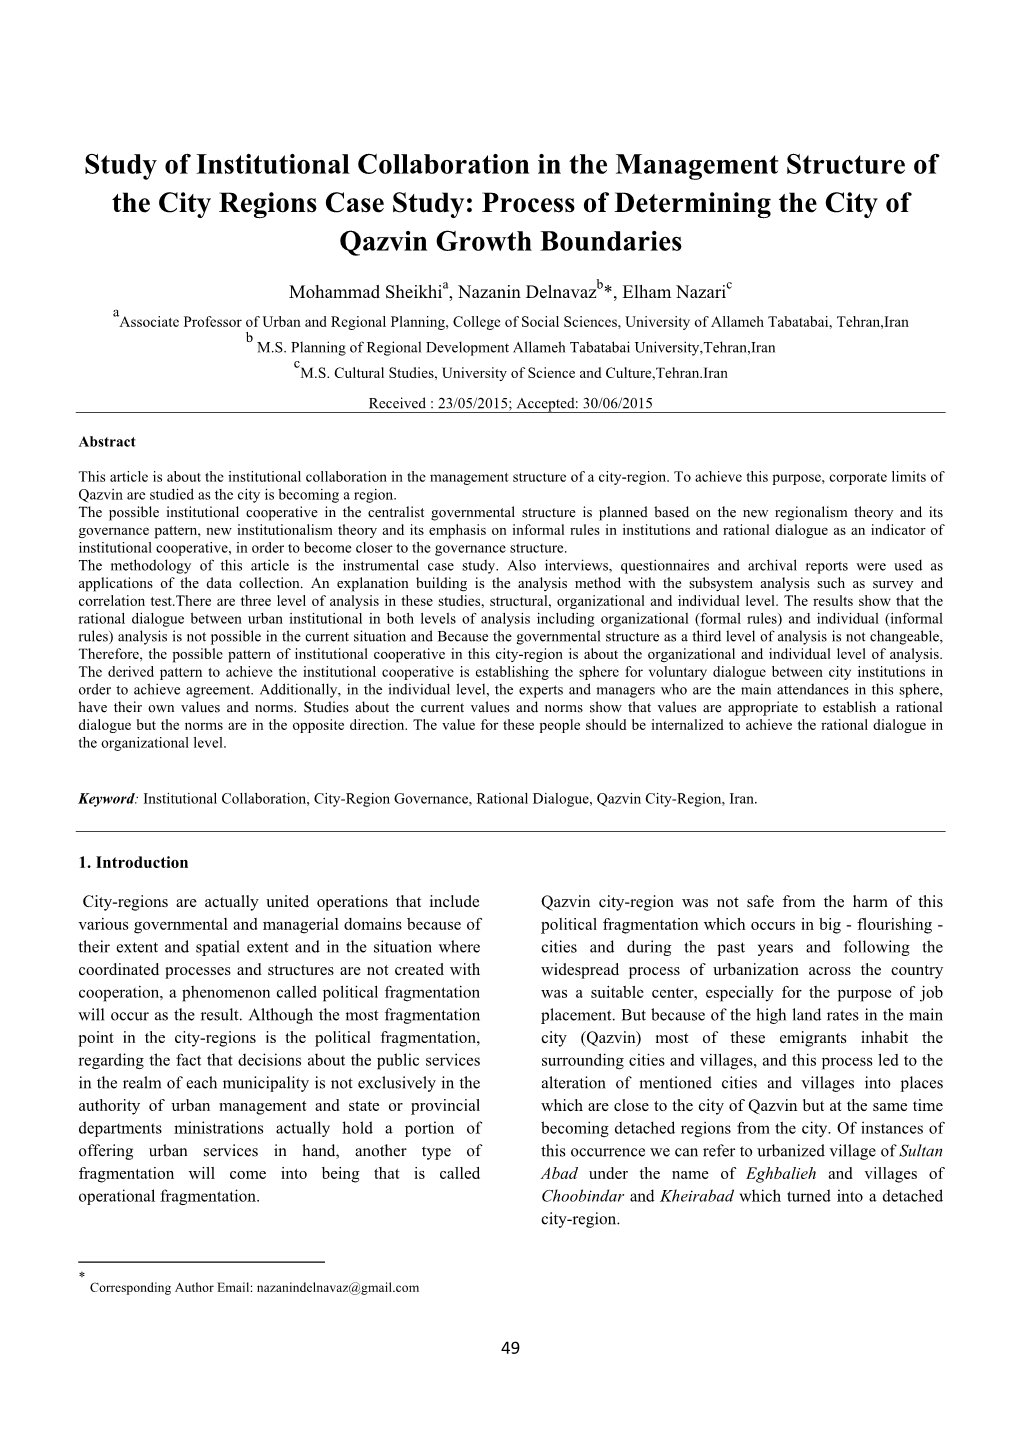 Study of Institutional Collaboration in the Management Structure of the City Regions Case Study: Process of Determining the City of Qazvin Growth Boundaries